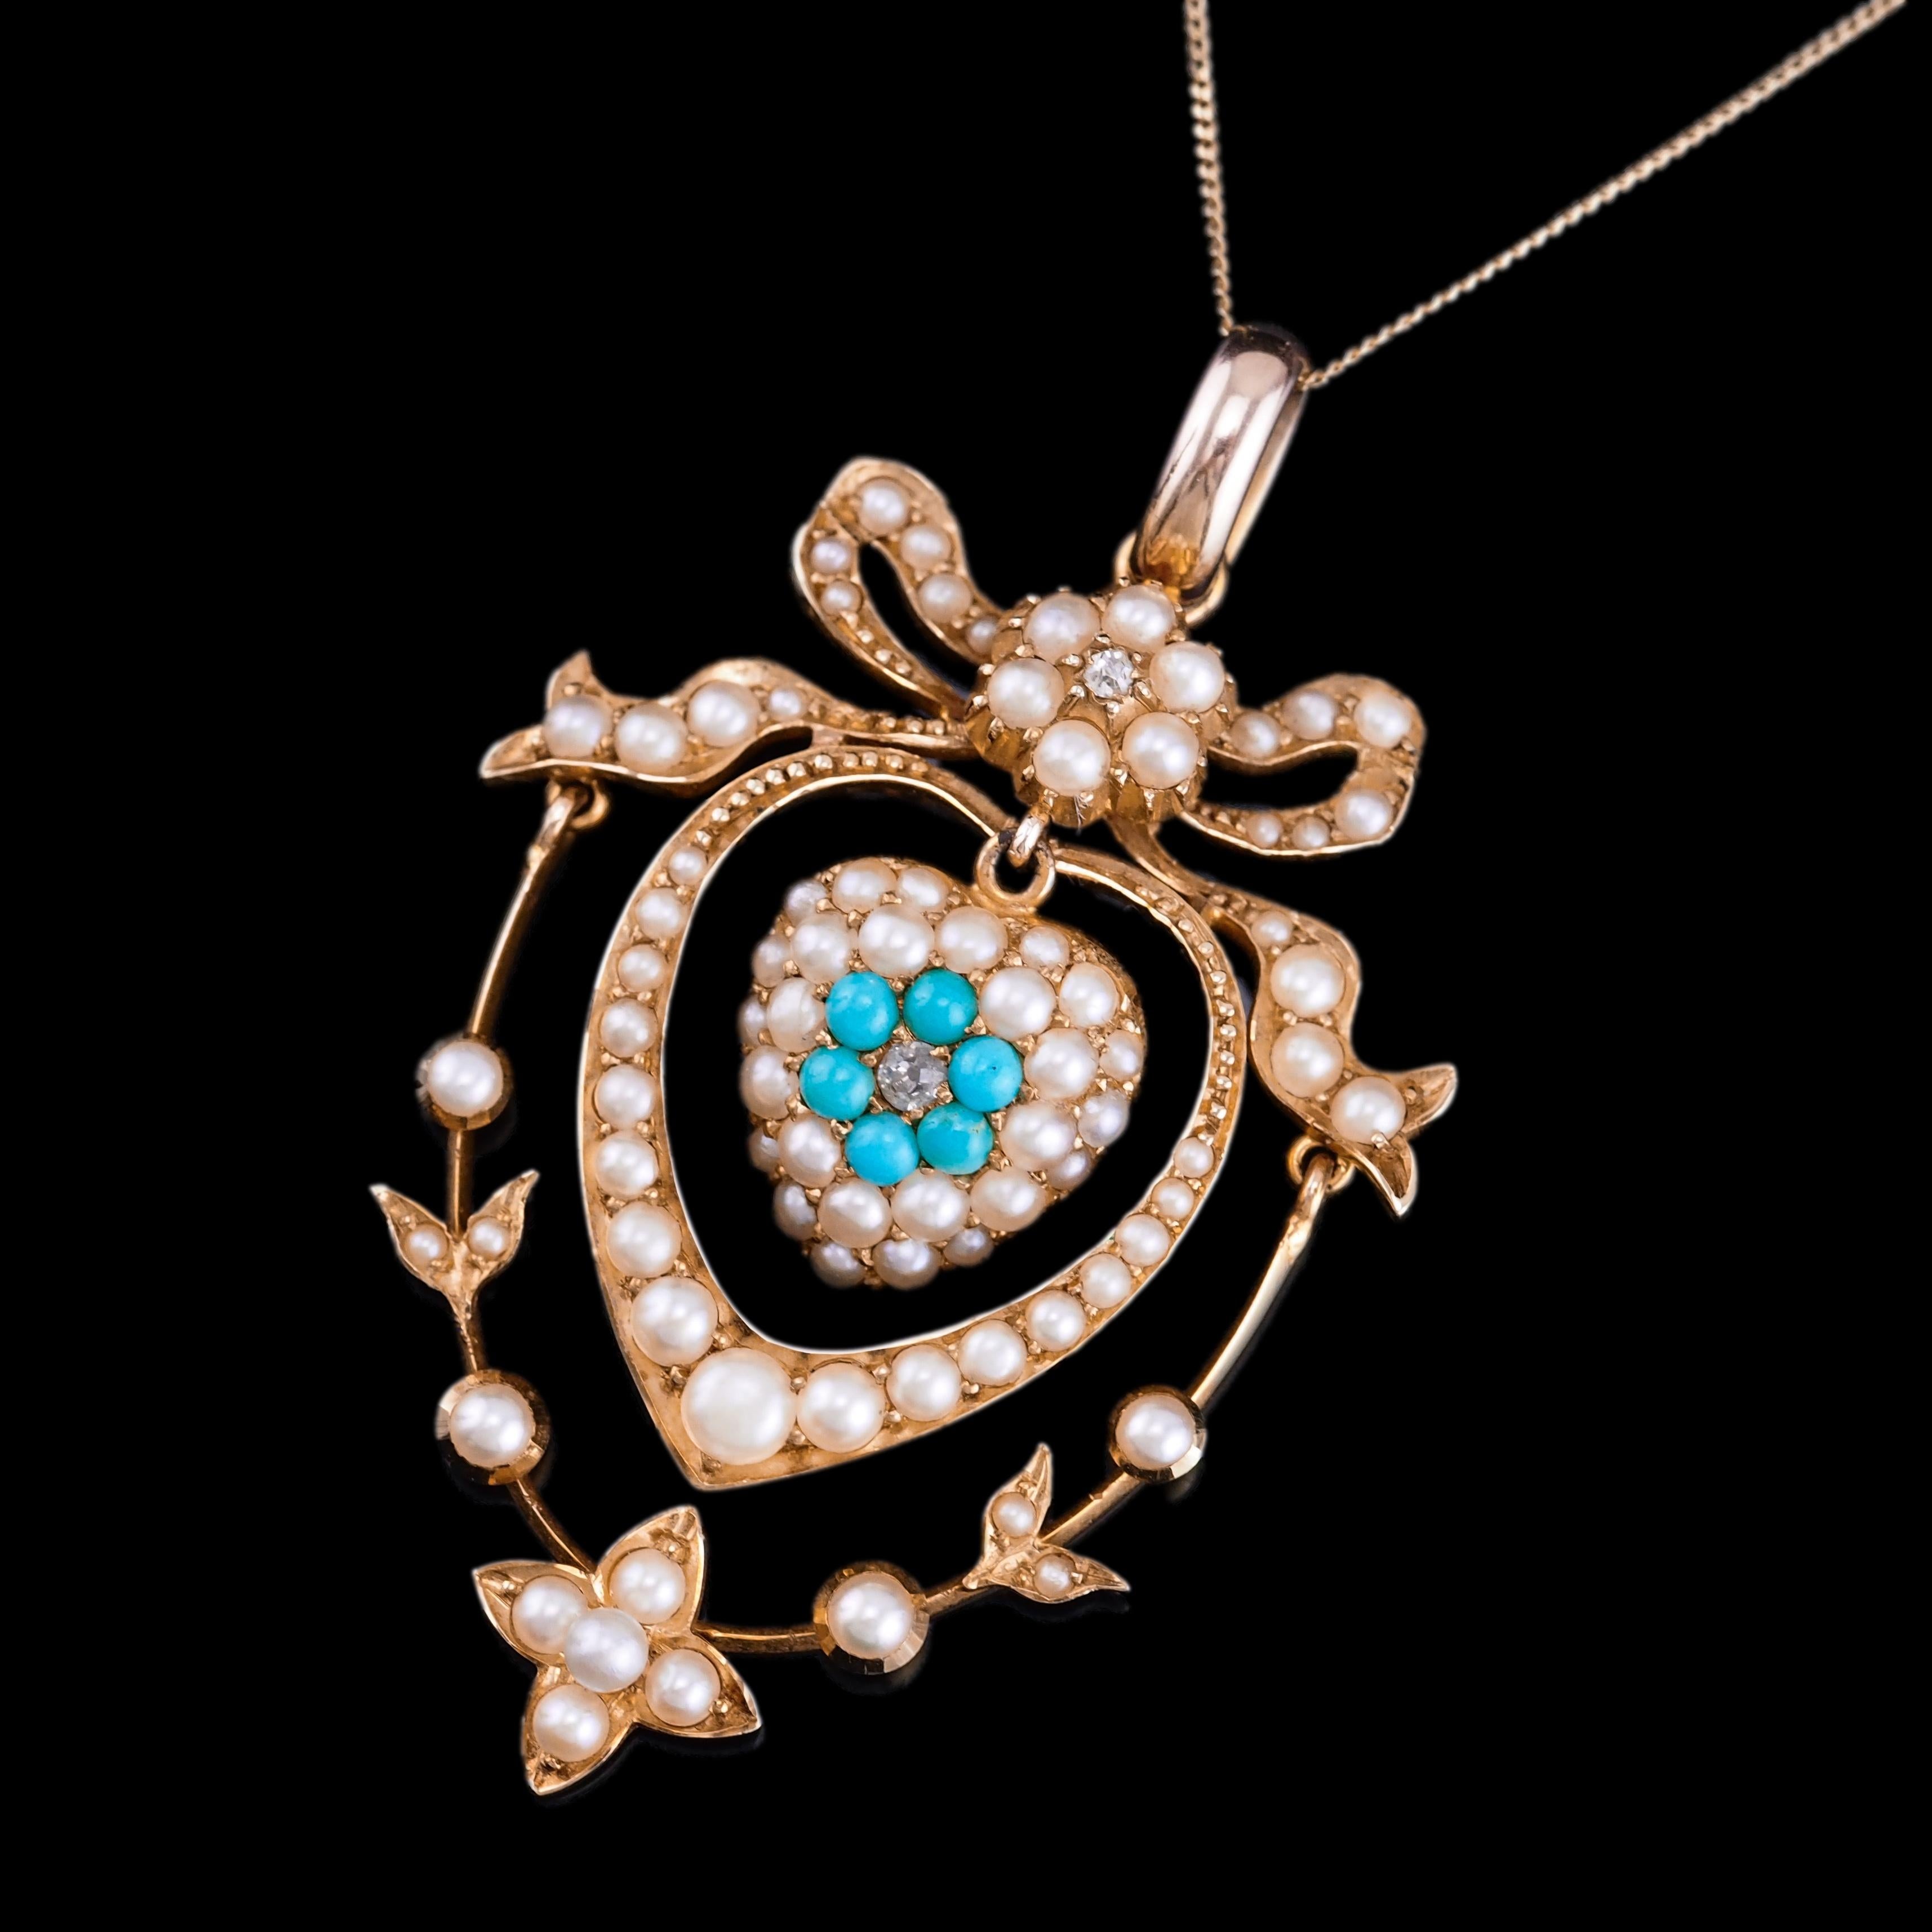 Antique Edwardian 15K Gold Turquoise Diamond & Seed Pearl Pendant Necklace c1910 For Sale 11